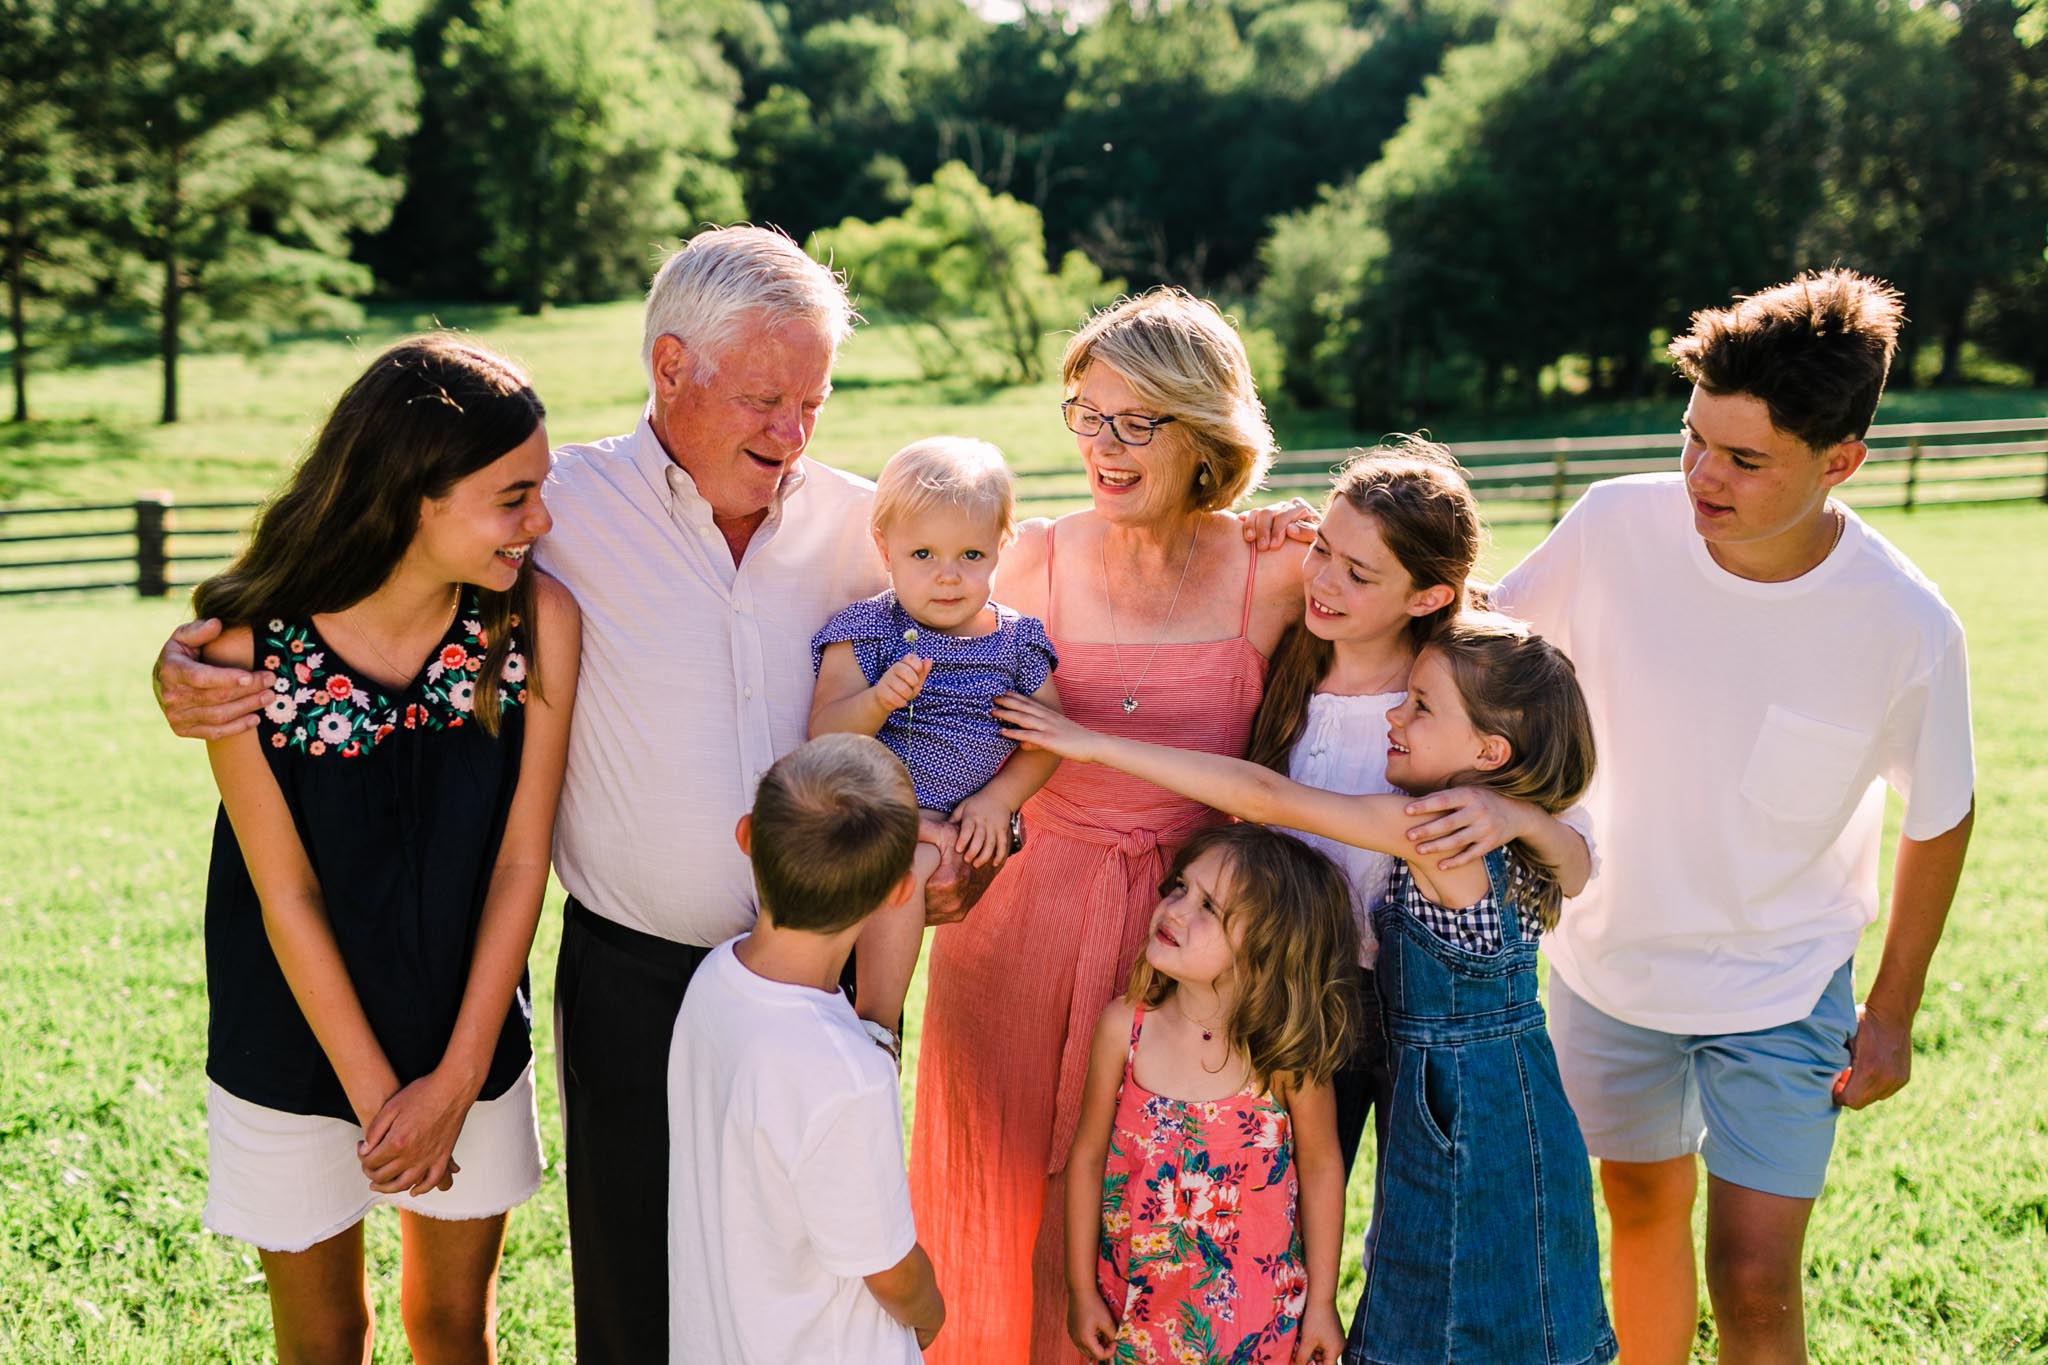 Durham Family Photographer | By G. Lin Photography | Candid portrait of grandparents holding grandkids outside